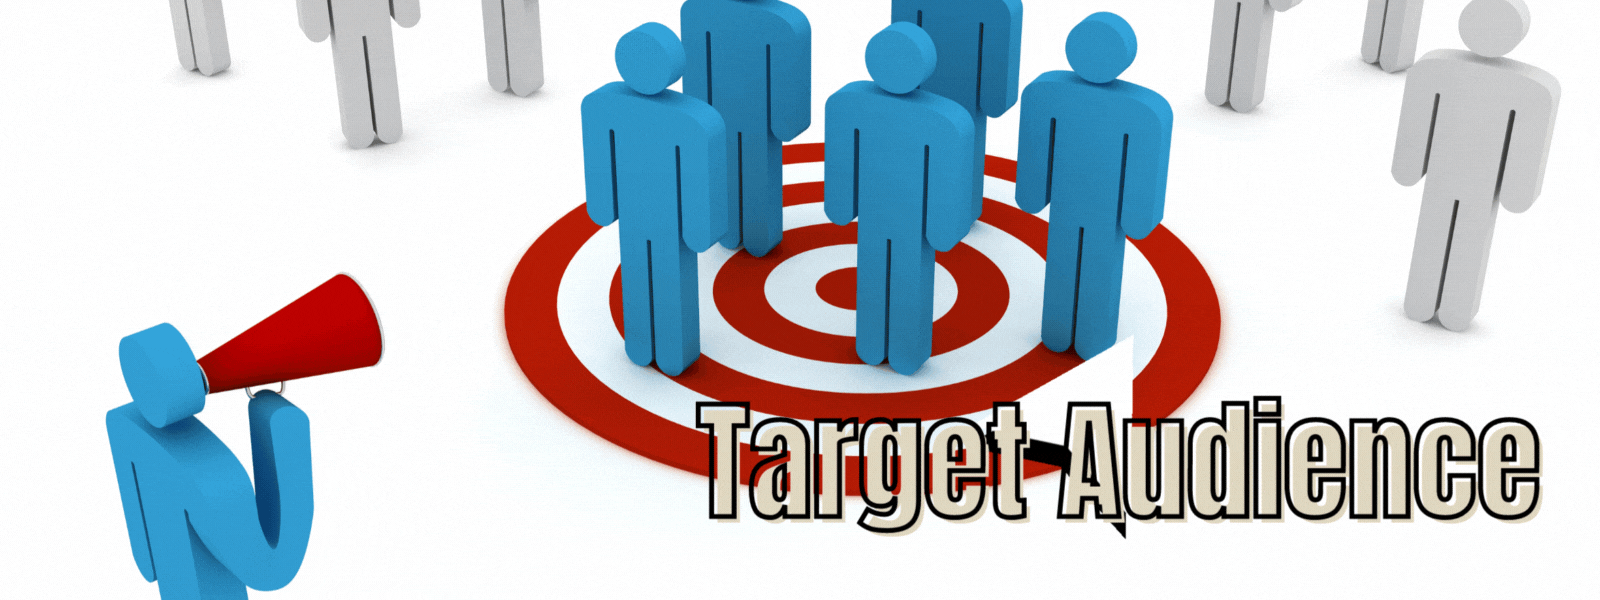 Know your target audience when your writing a blog topic for SEO